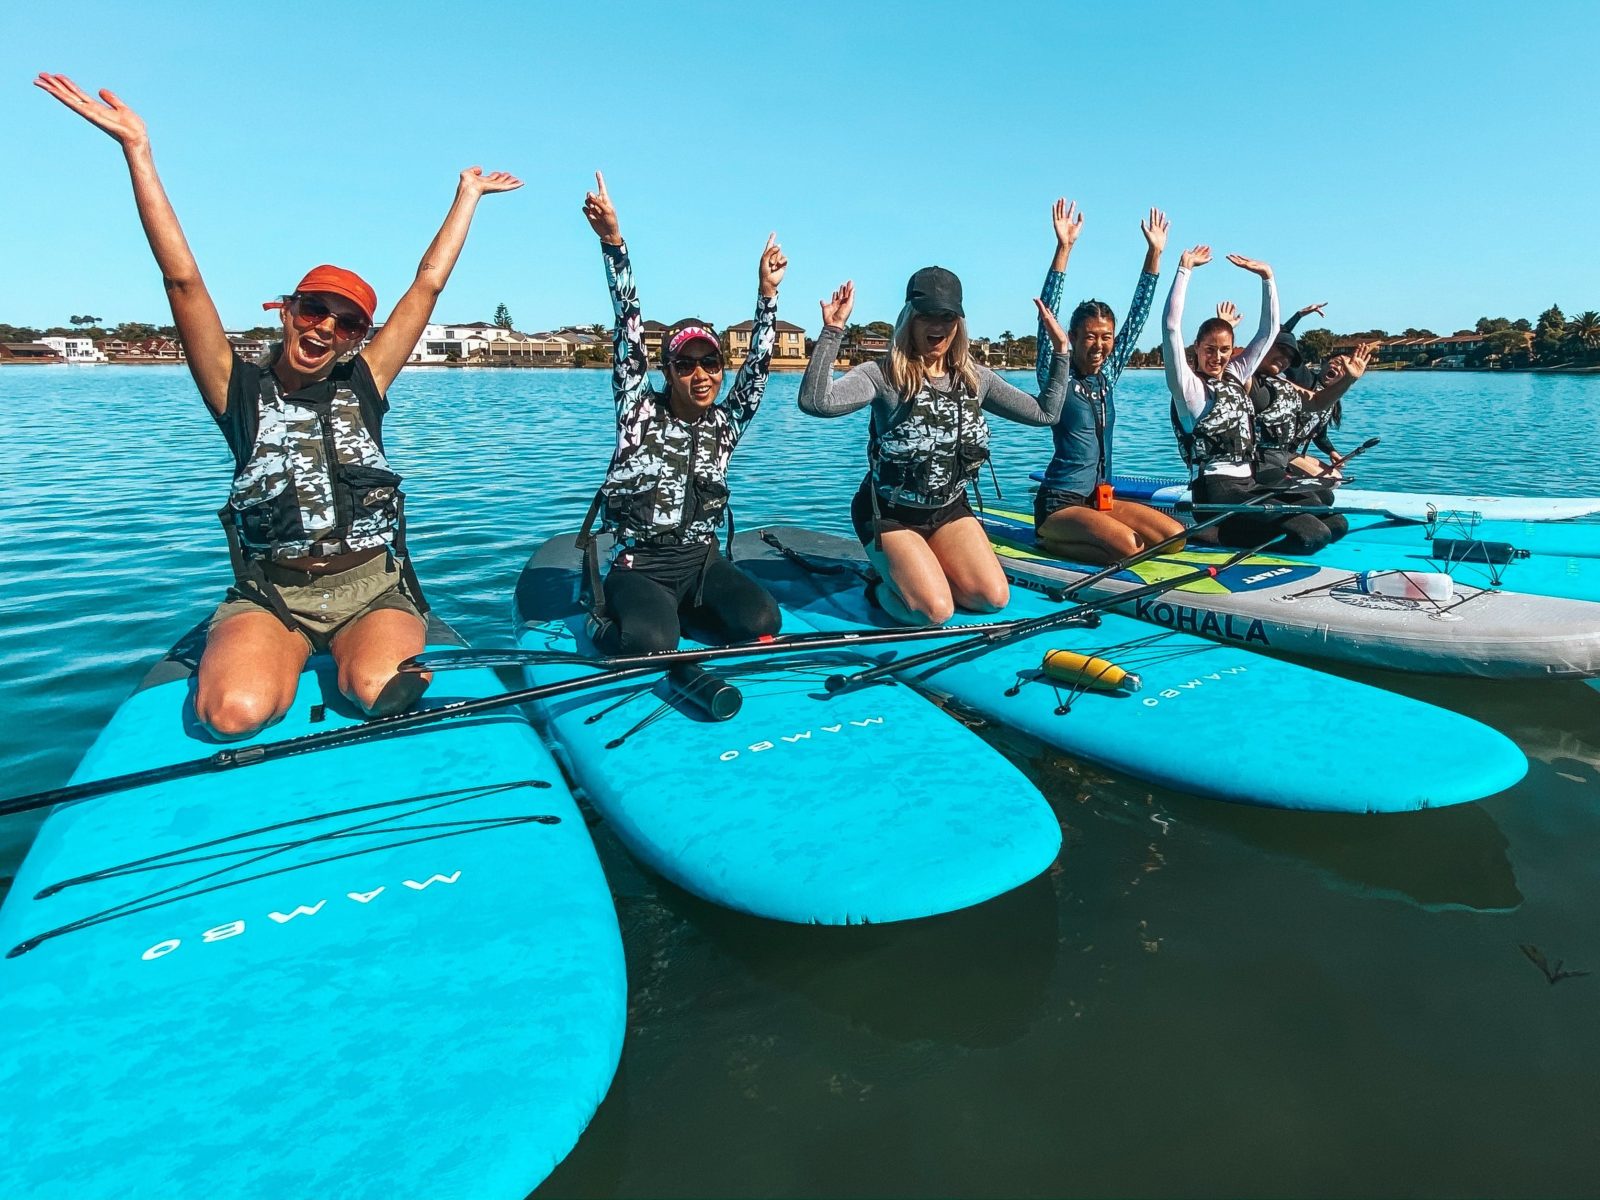 womens stand up paddle boarding SA. lesson for women at west lakes. beginner friendly SUP tours.